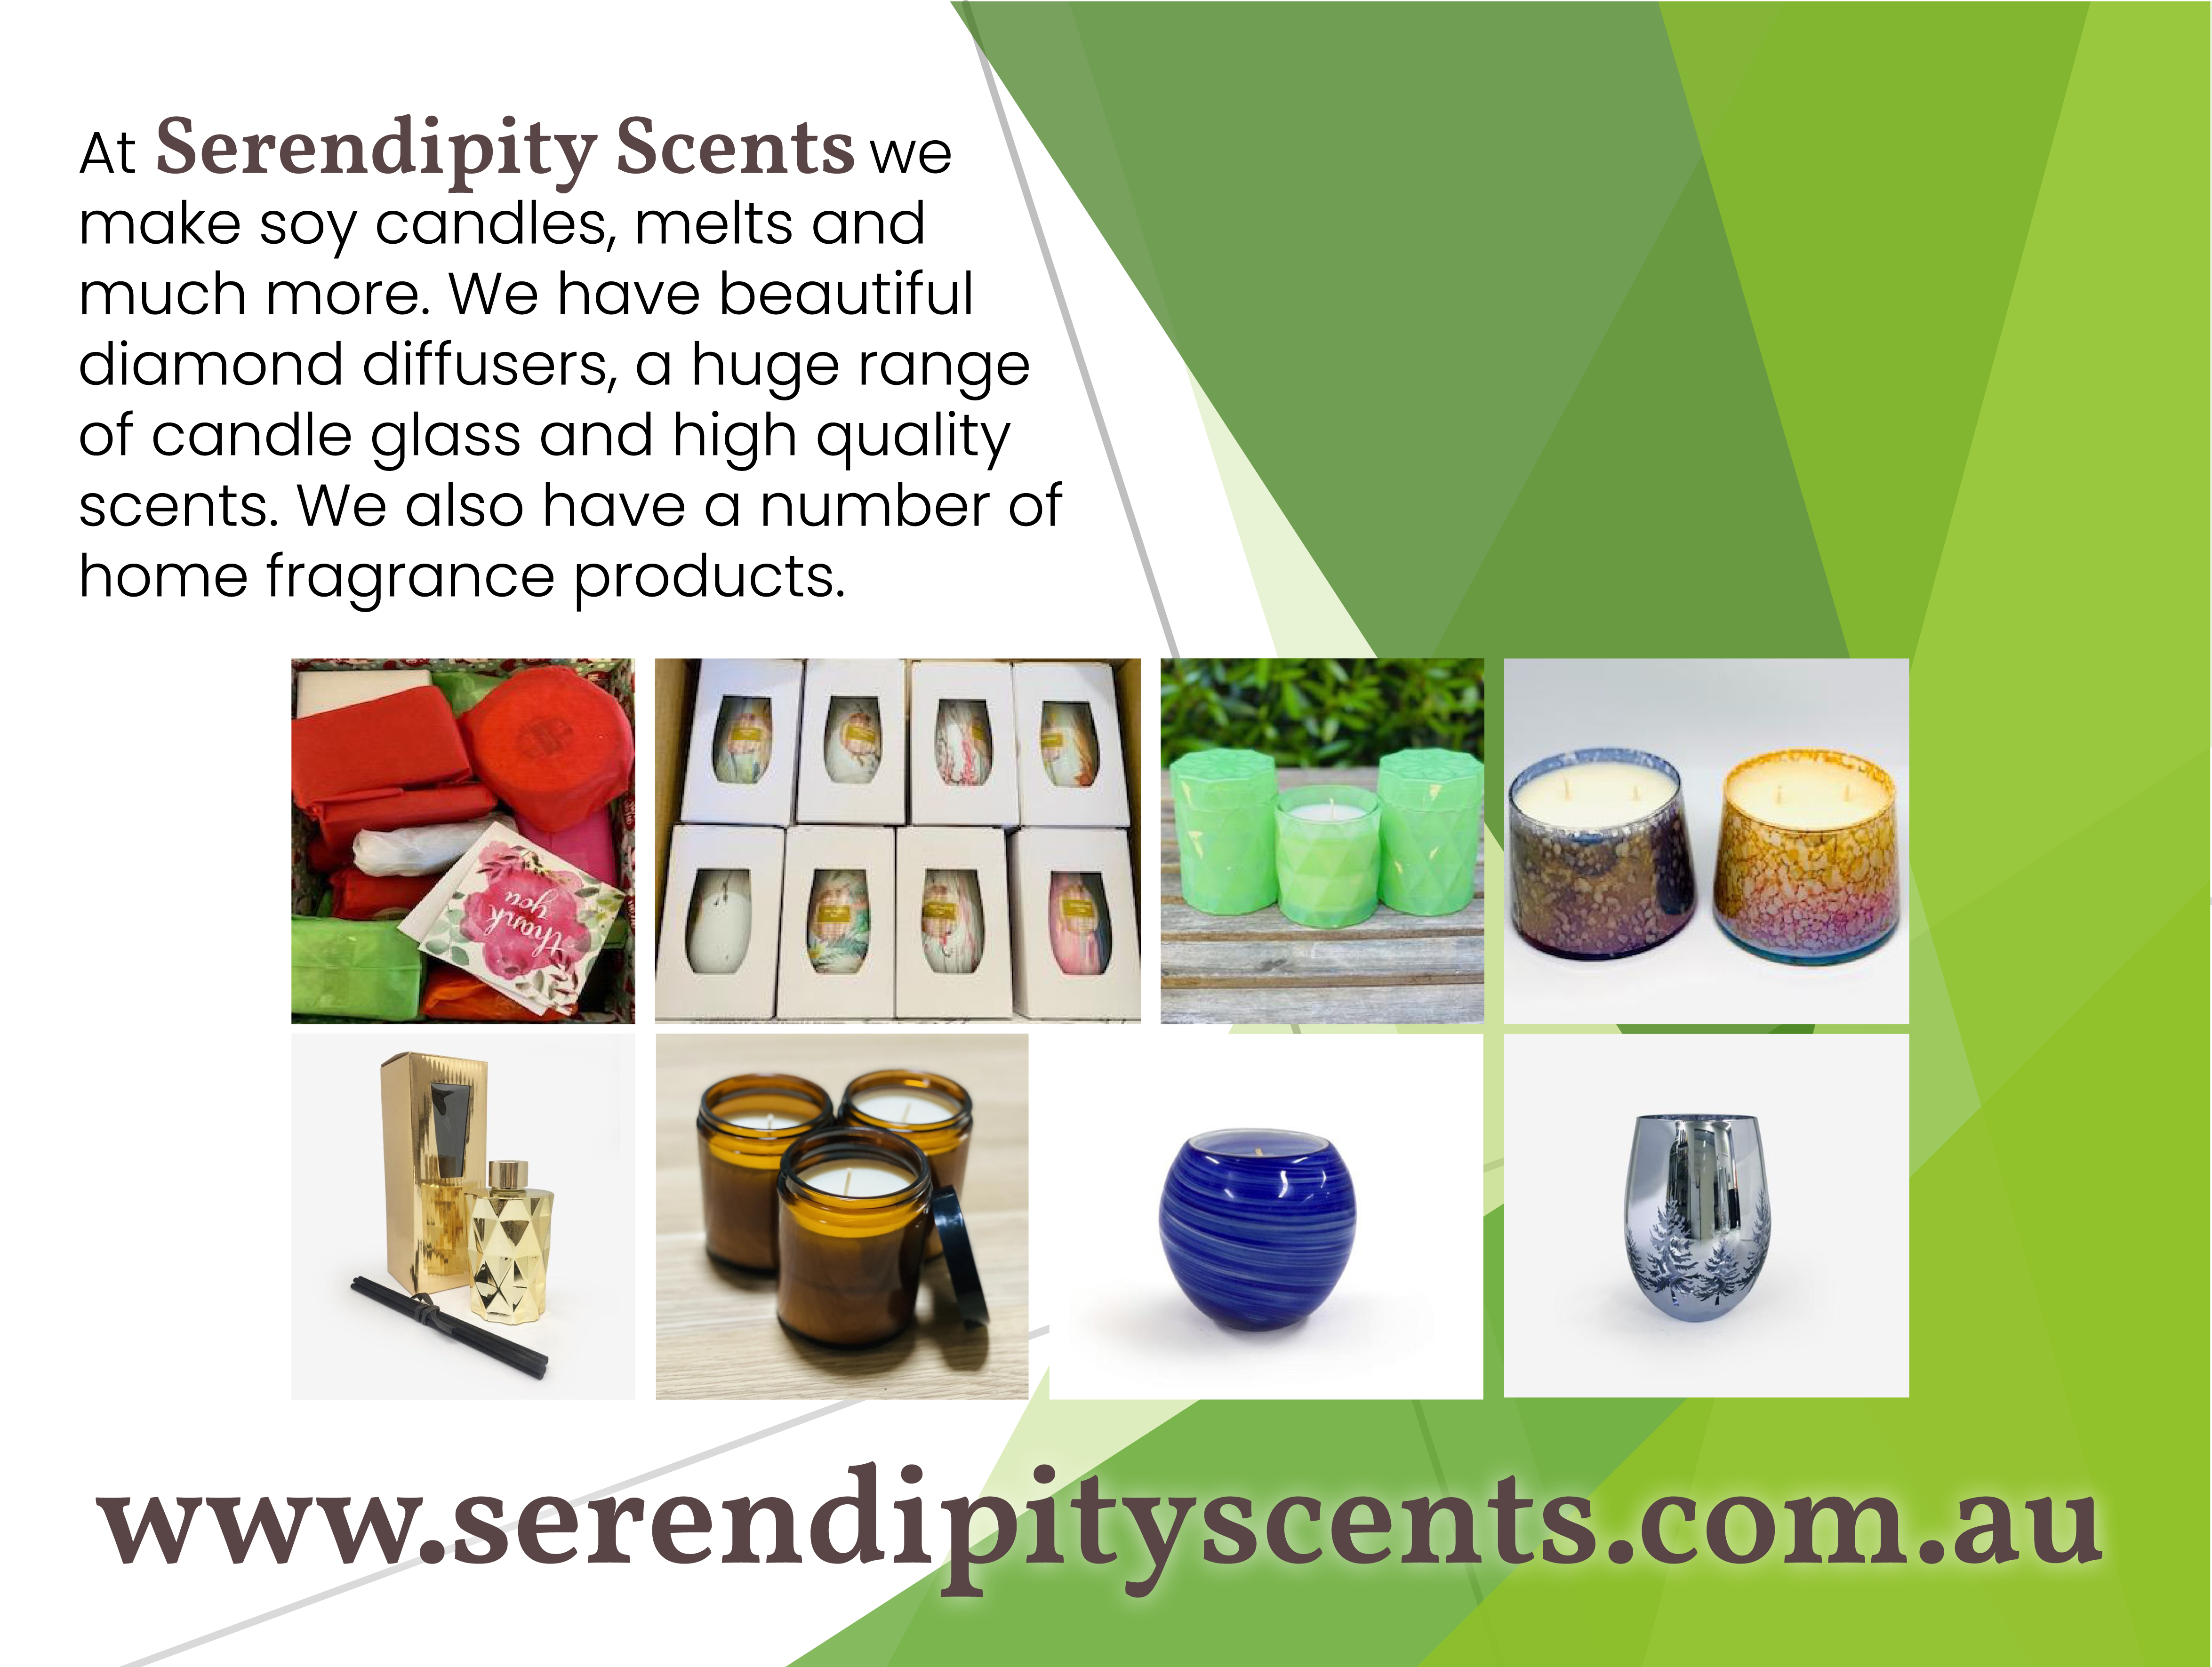 Serendipity Scents